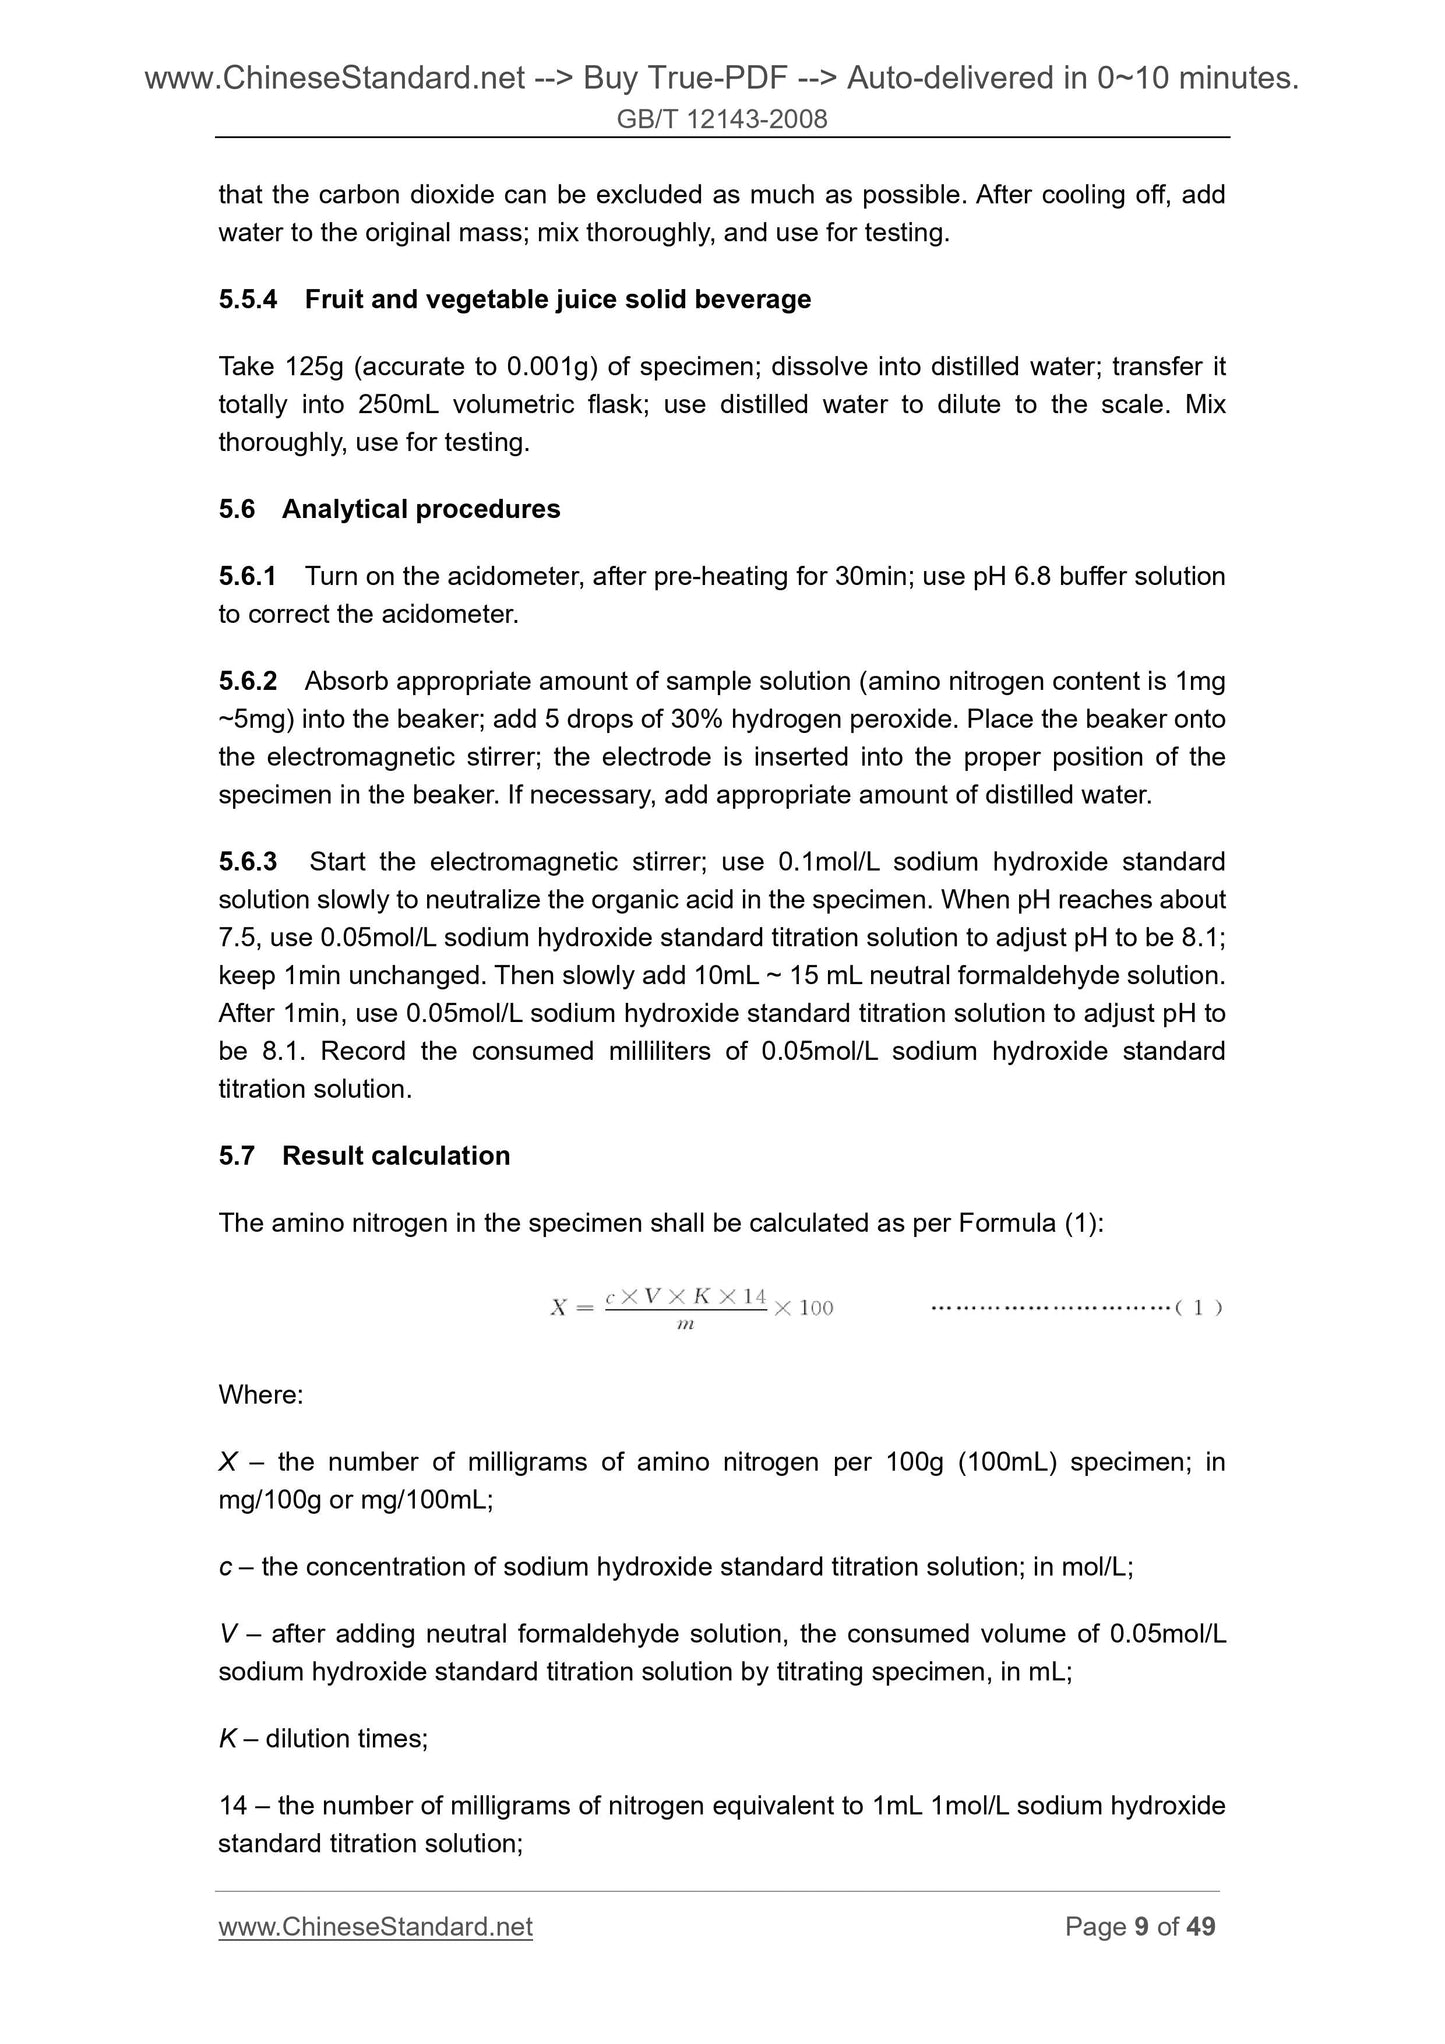 GB/T 12143-2008 Page 5